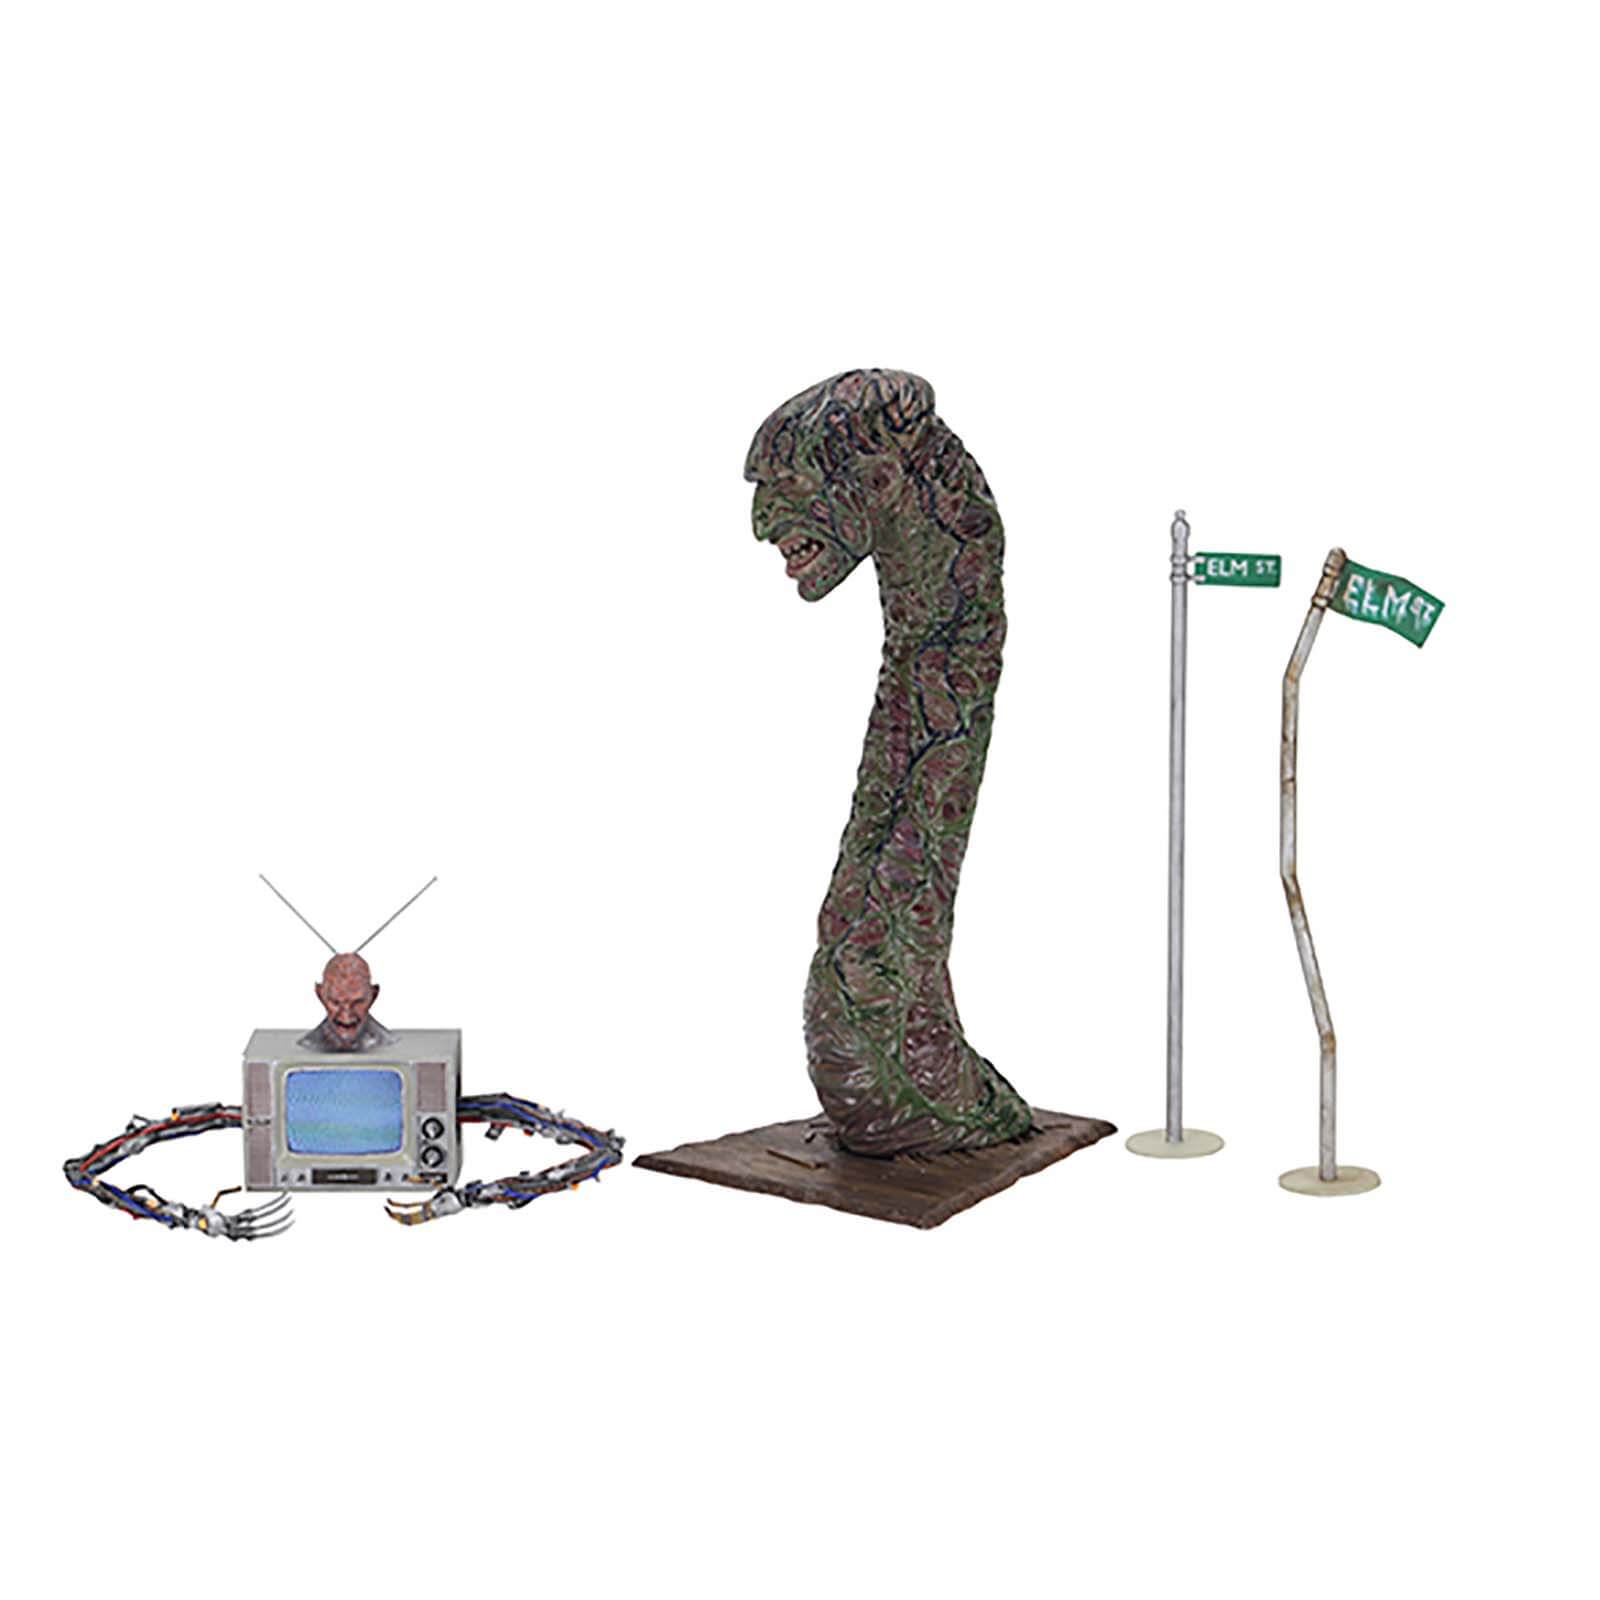 NECA Nightmare on Elm Street - Accessory Pack - Deluxe Accessory Set